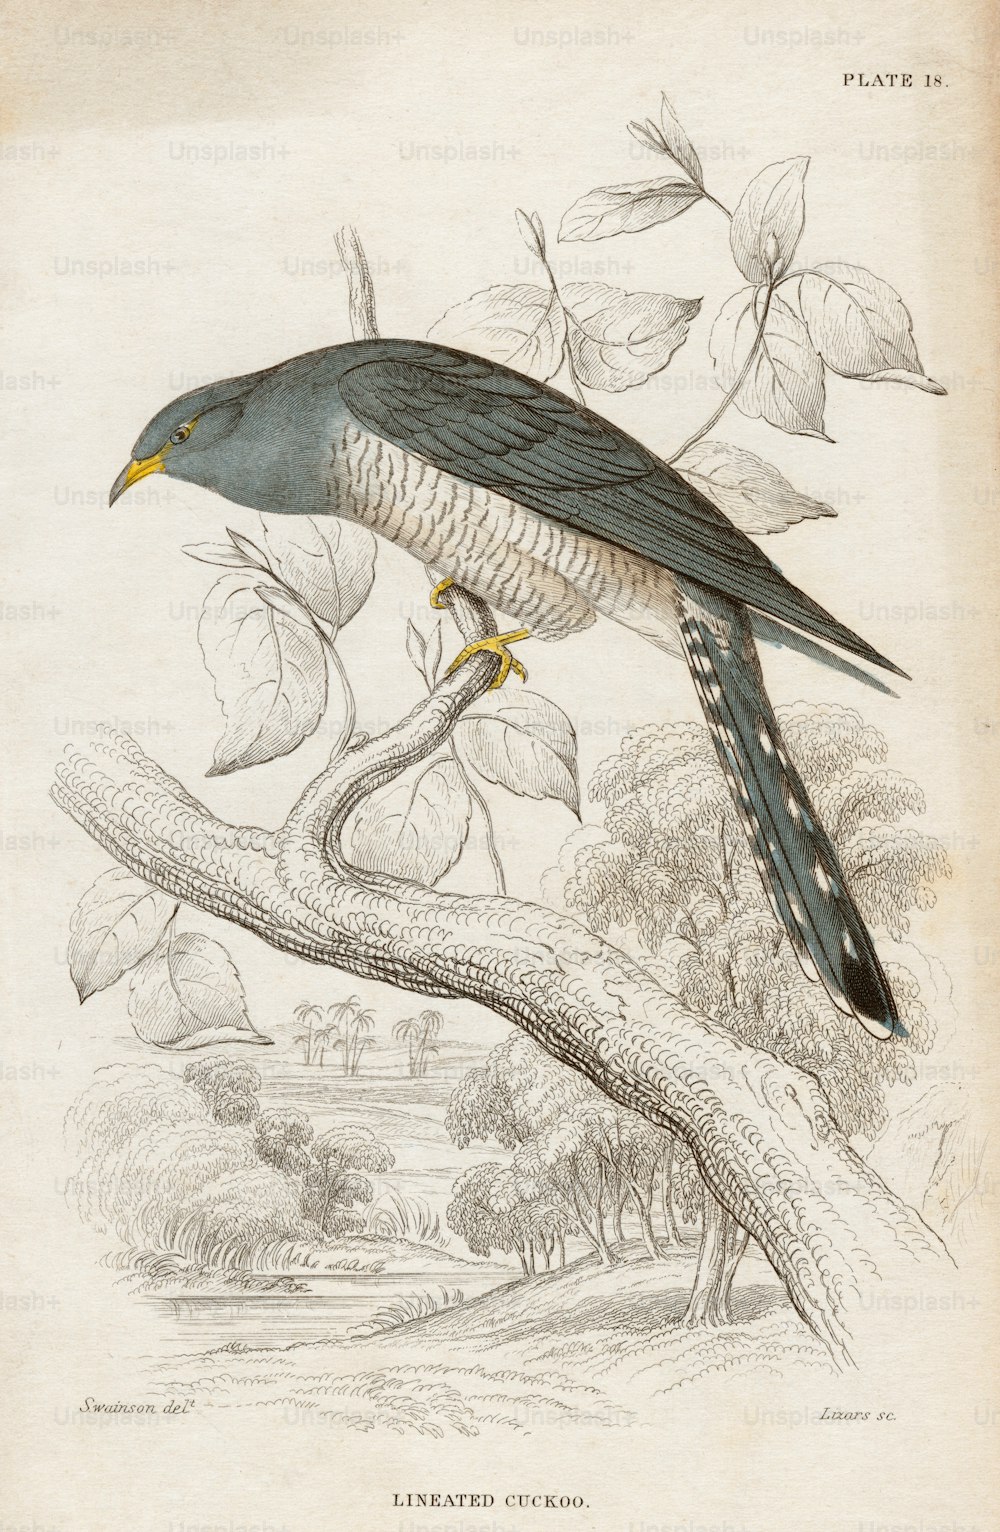 A plate illustration of a 'lineated cuckoo' (Coracina lineata), circa 1840. The bird, found in Australia, Indonesia, Papua New Guinea, and the Solomon Islands, is now known as the Barred Cuckooshrike or Yellow-eyed Cuckooshrike. Engraving by W.H. Lizars after a painting by English naturalist William John Swainson (1789 - 1855).  (Photo by Hulton Archive/Getty Images)